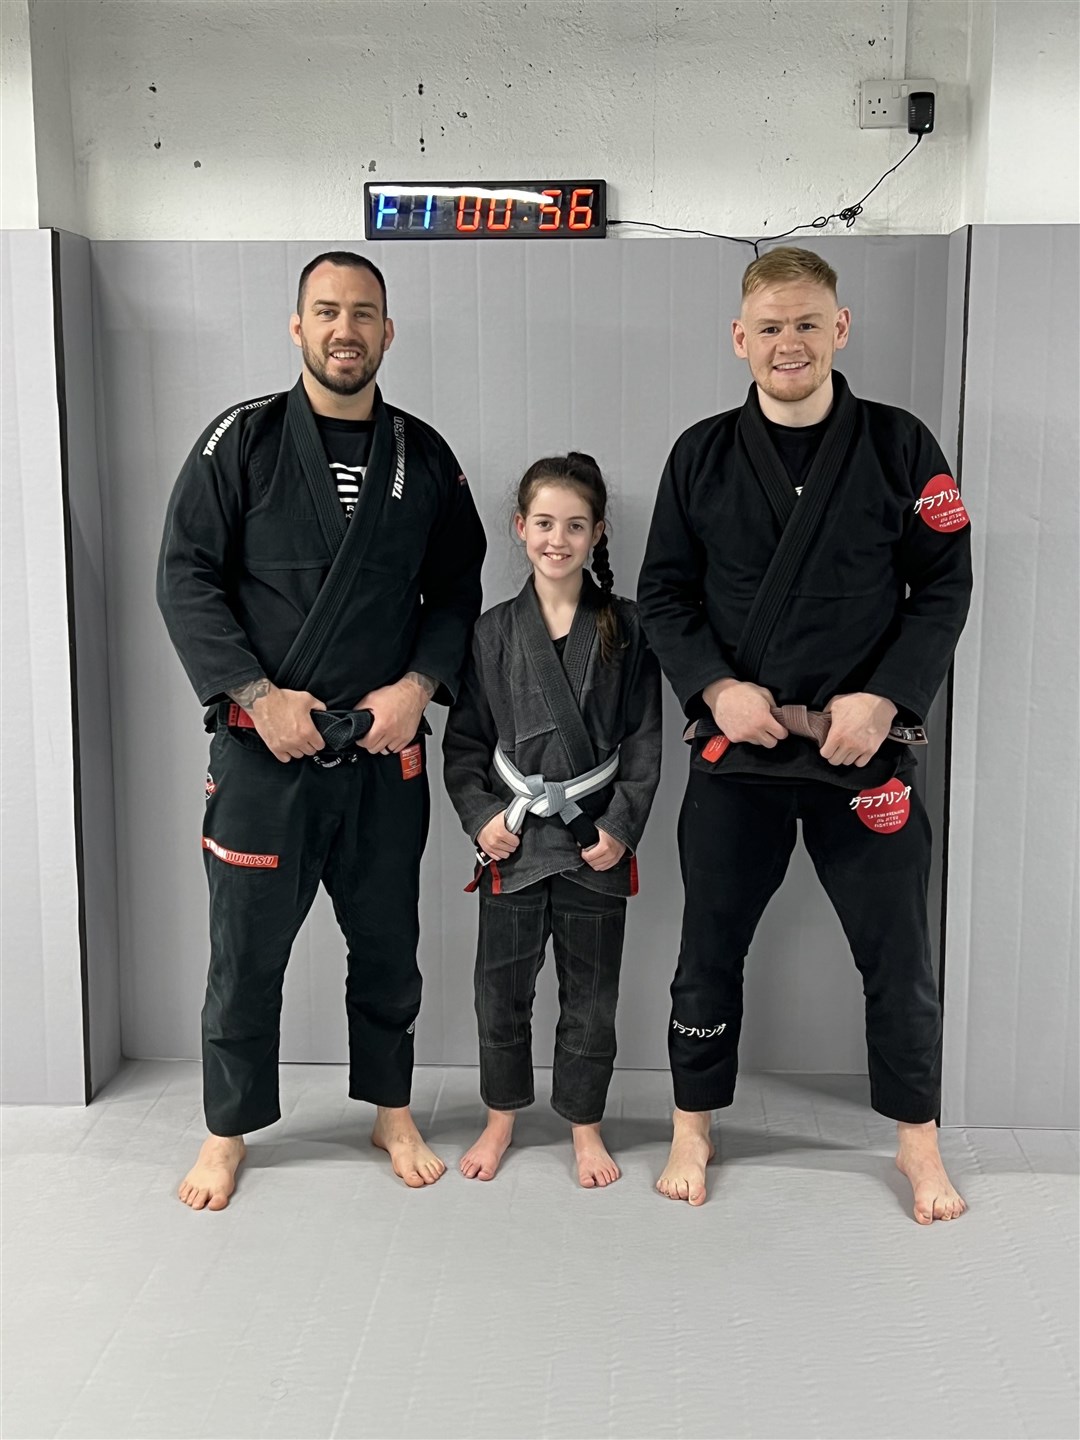 Niamh Ross (centre) is one of Mikeysline’s new Bee the Change Champions. She is pictured here with SBG Moray coaches Martin Donaldson (left) and Kevin McAloon.